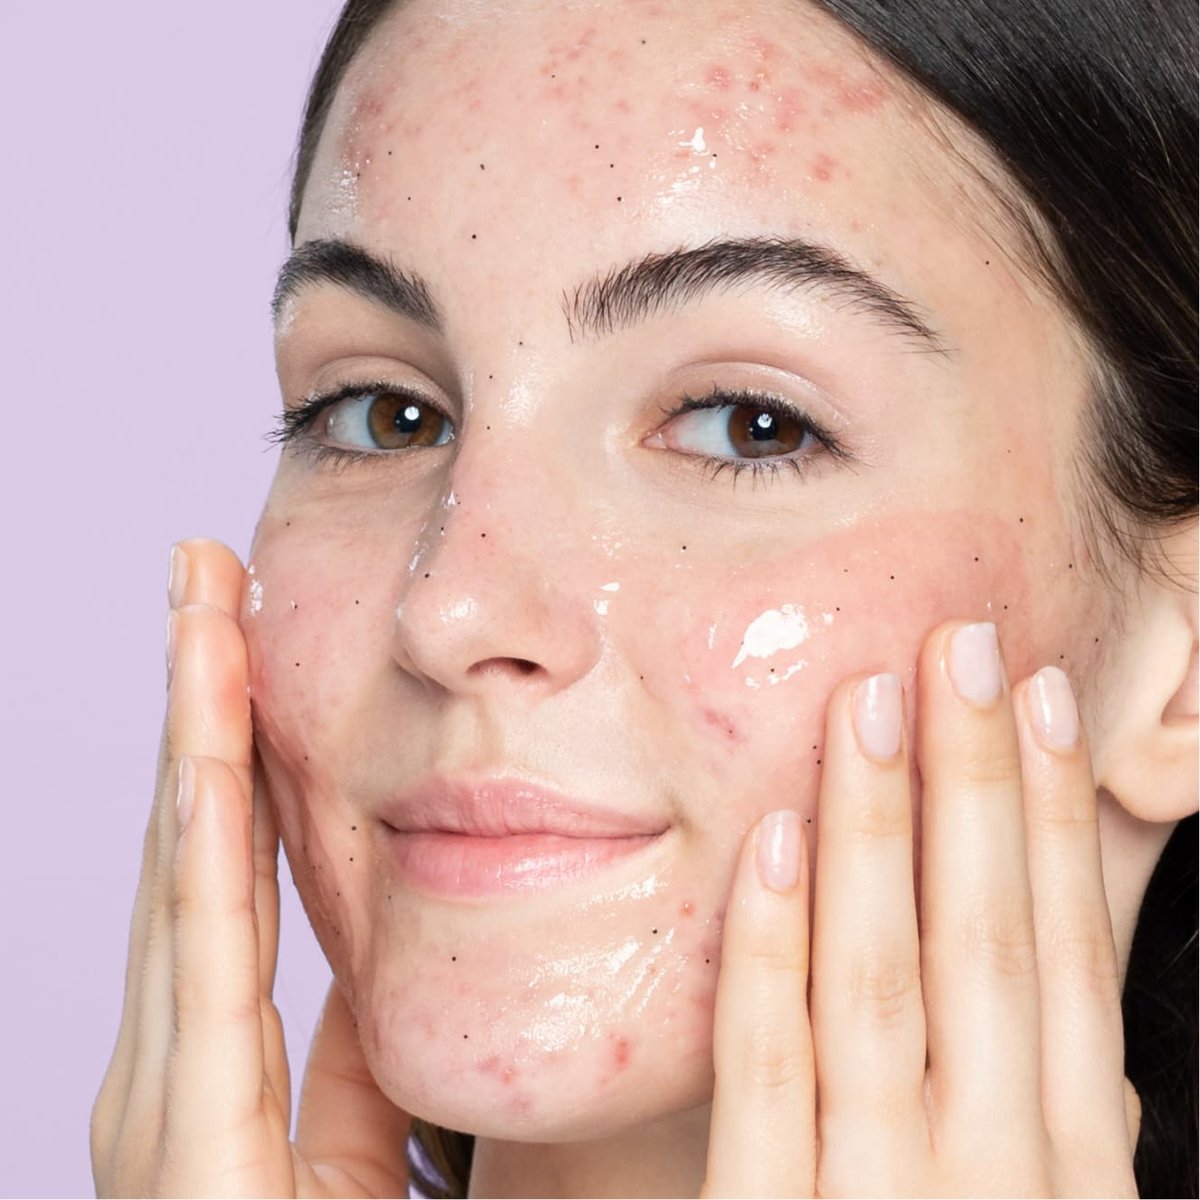 Young teen with brown eyes and brown hair with acne wipes applies watermelon juicy scrub to cheeks in front of purple background